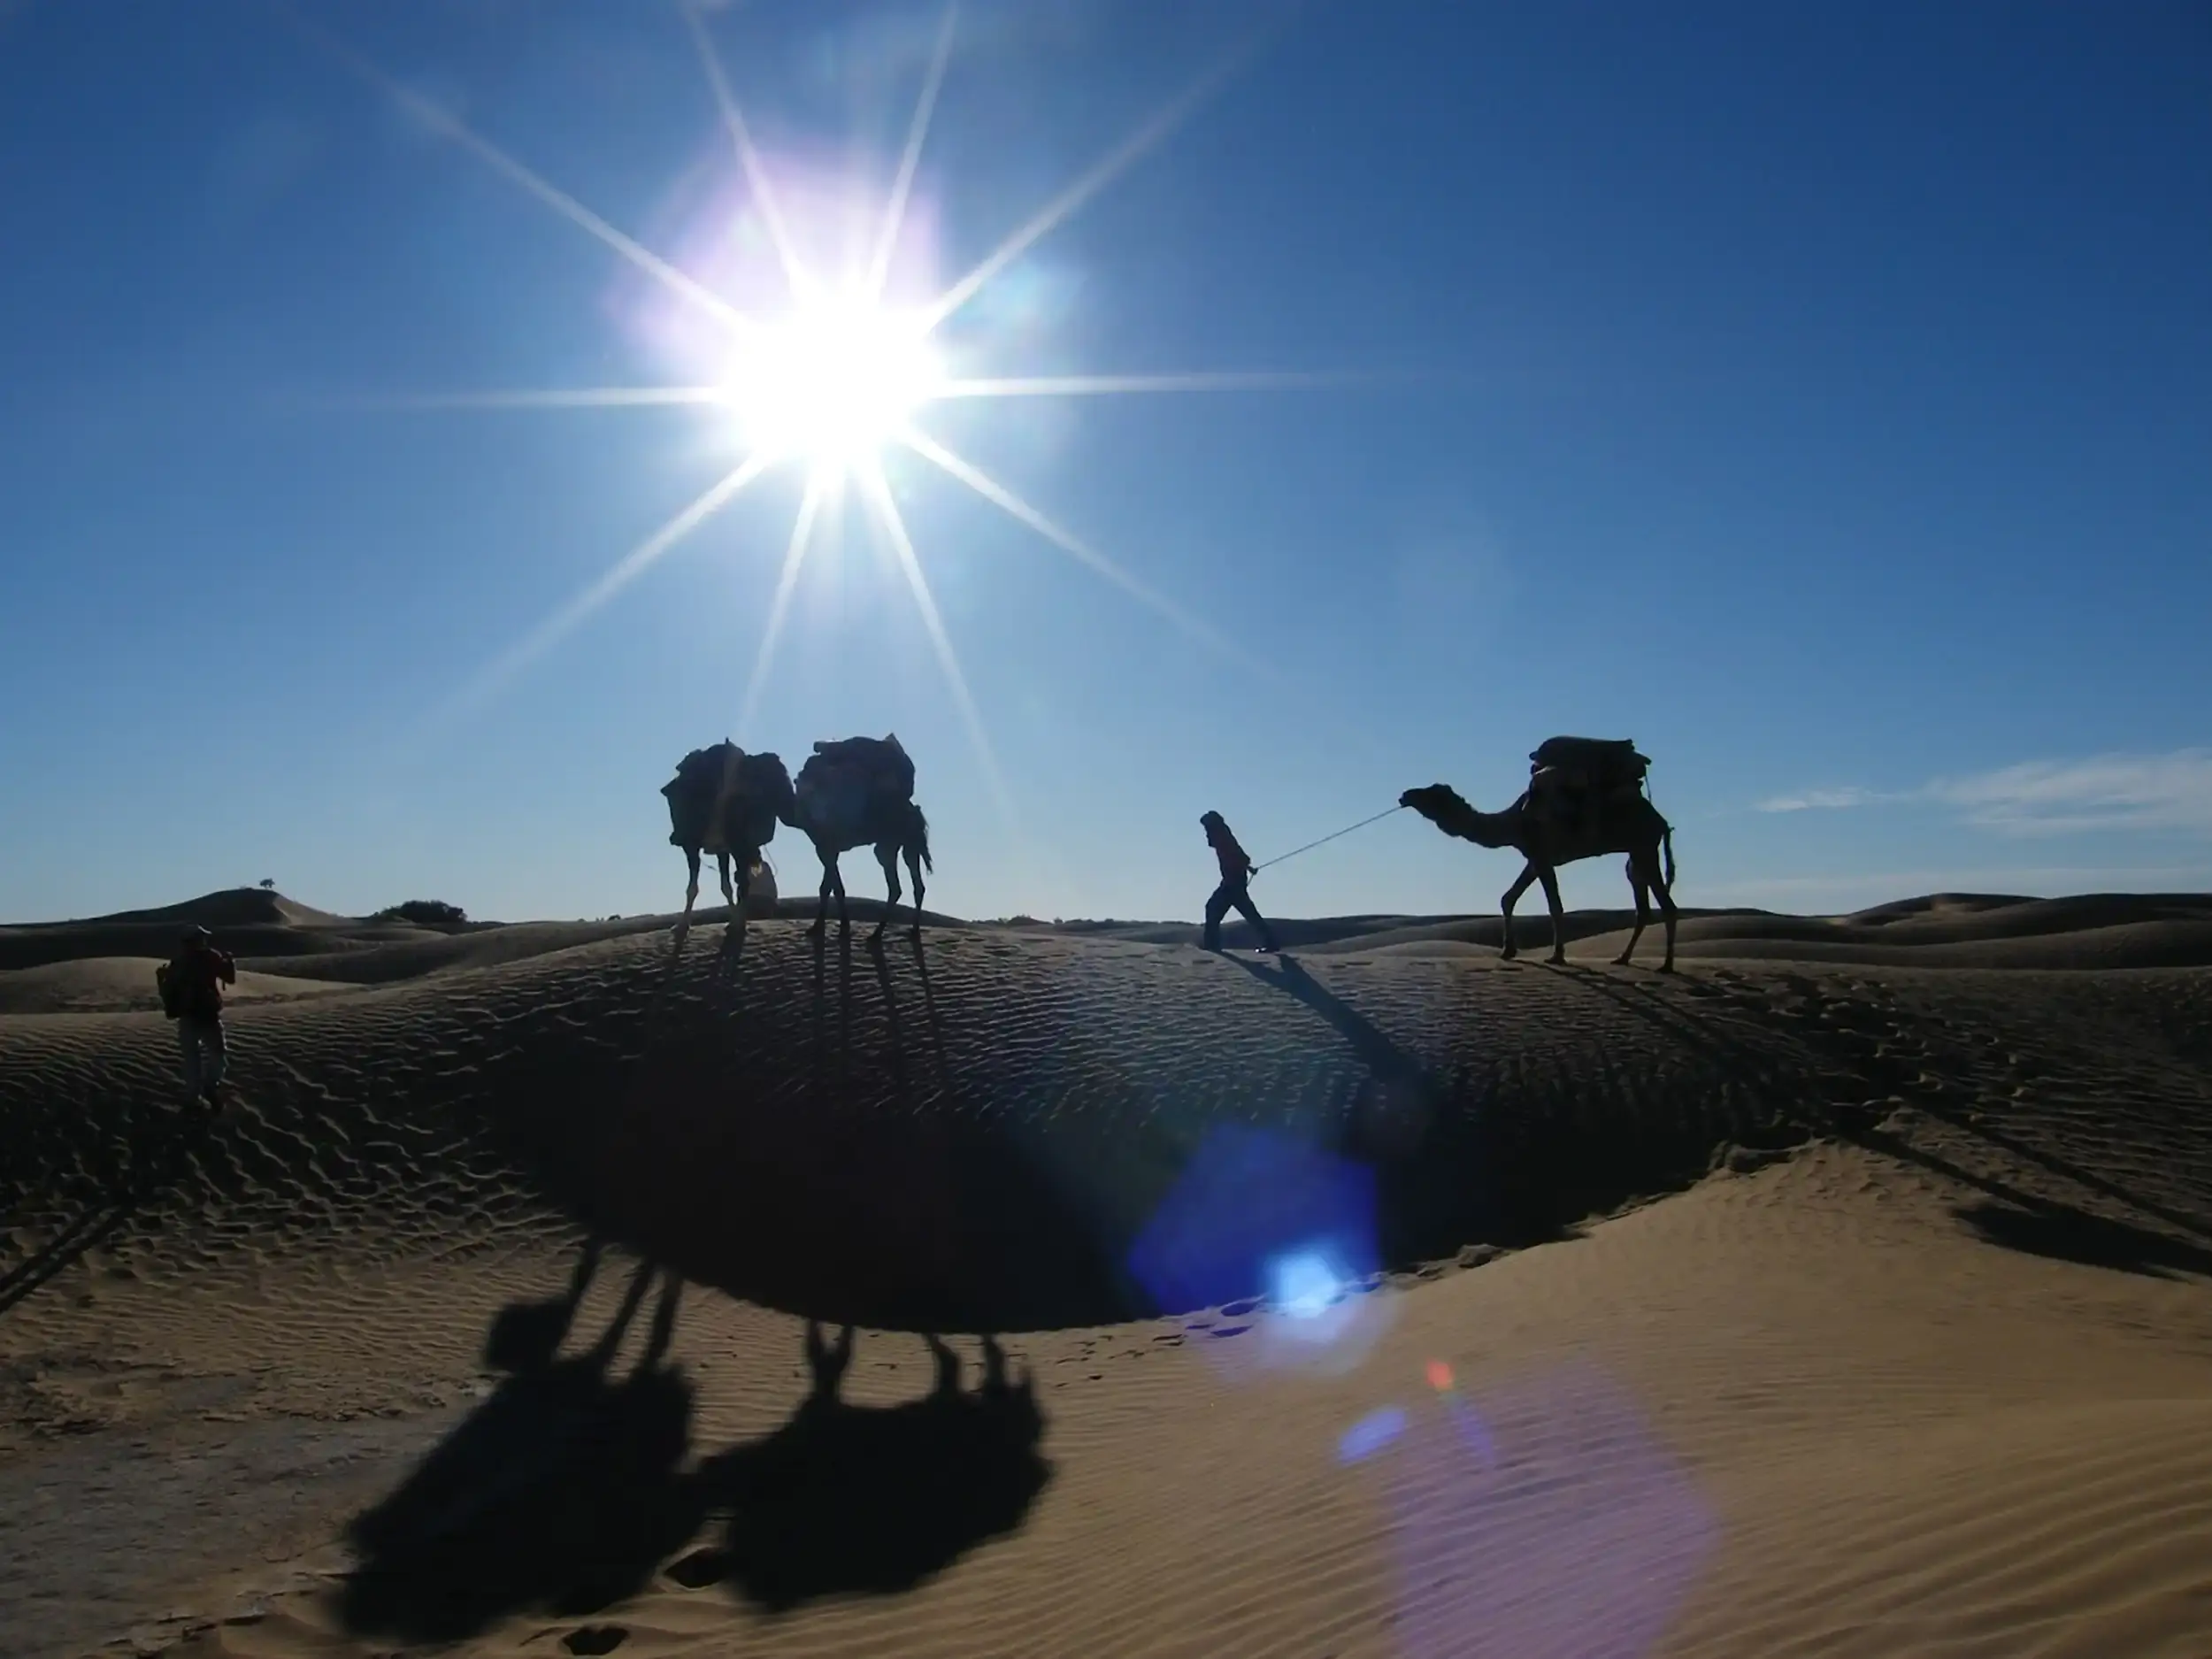 Experience the desert during your stay at our guesthouse in Marrakech